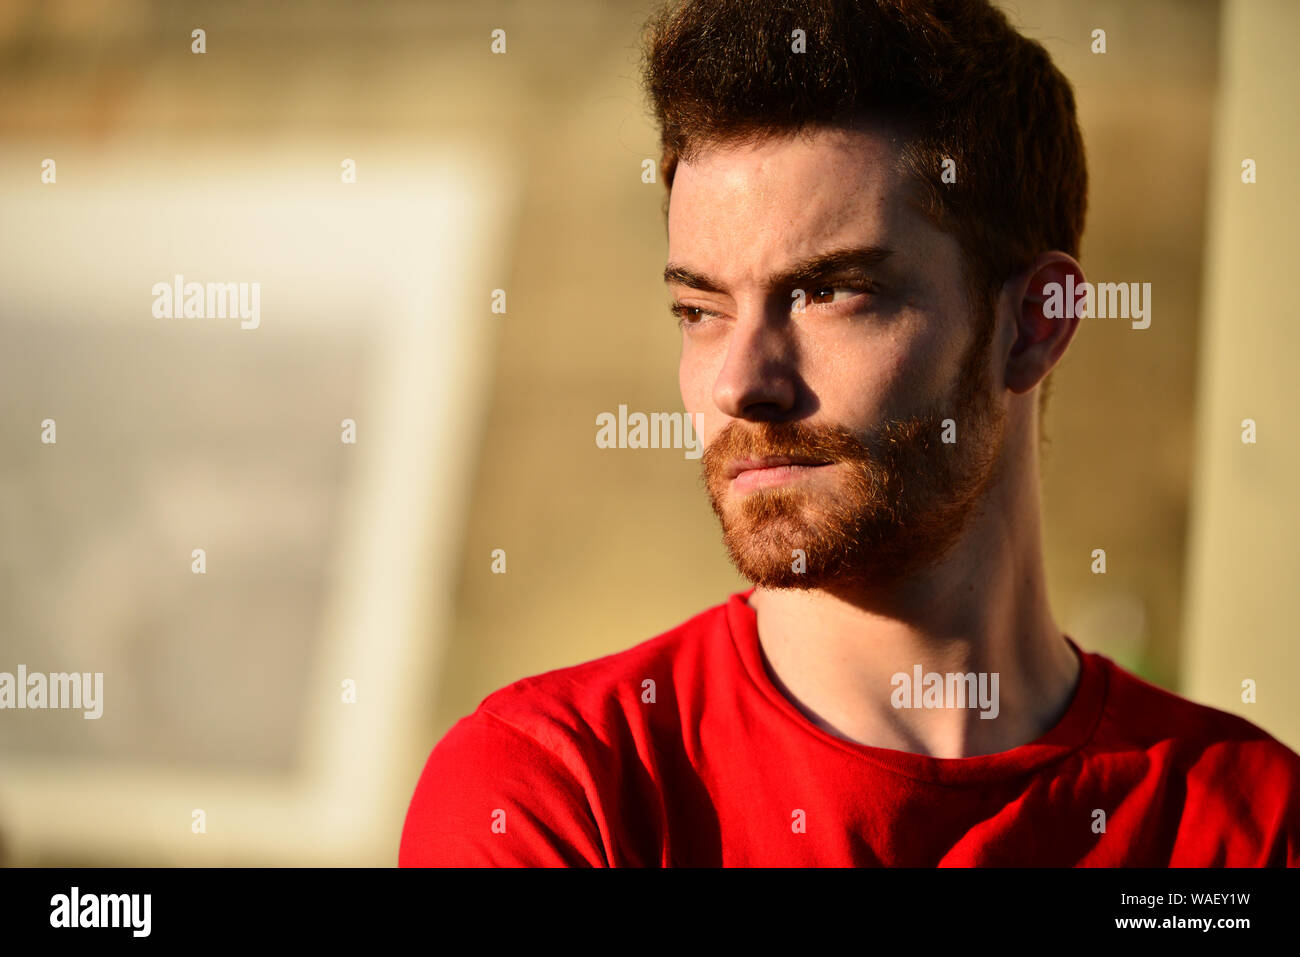 Handsome young man with red hair Stock Photo